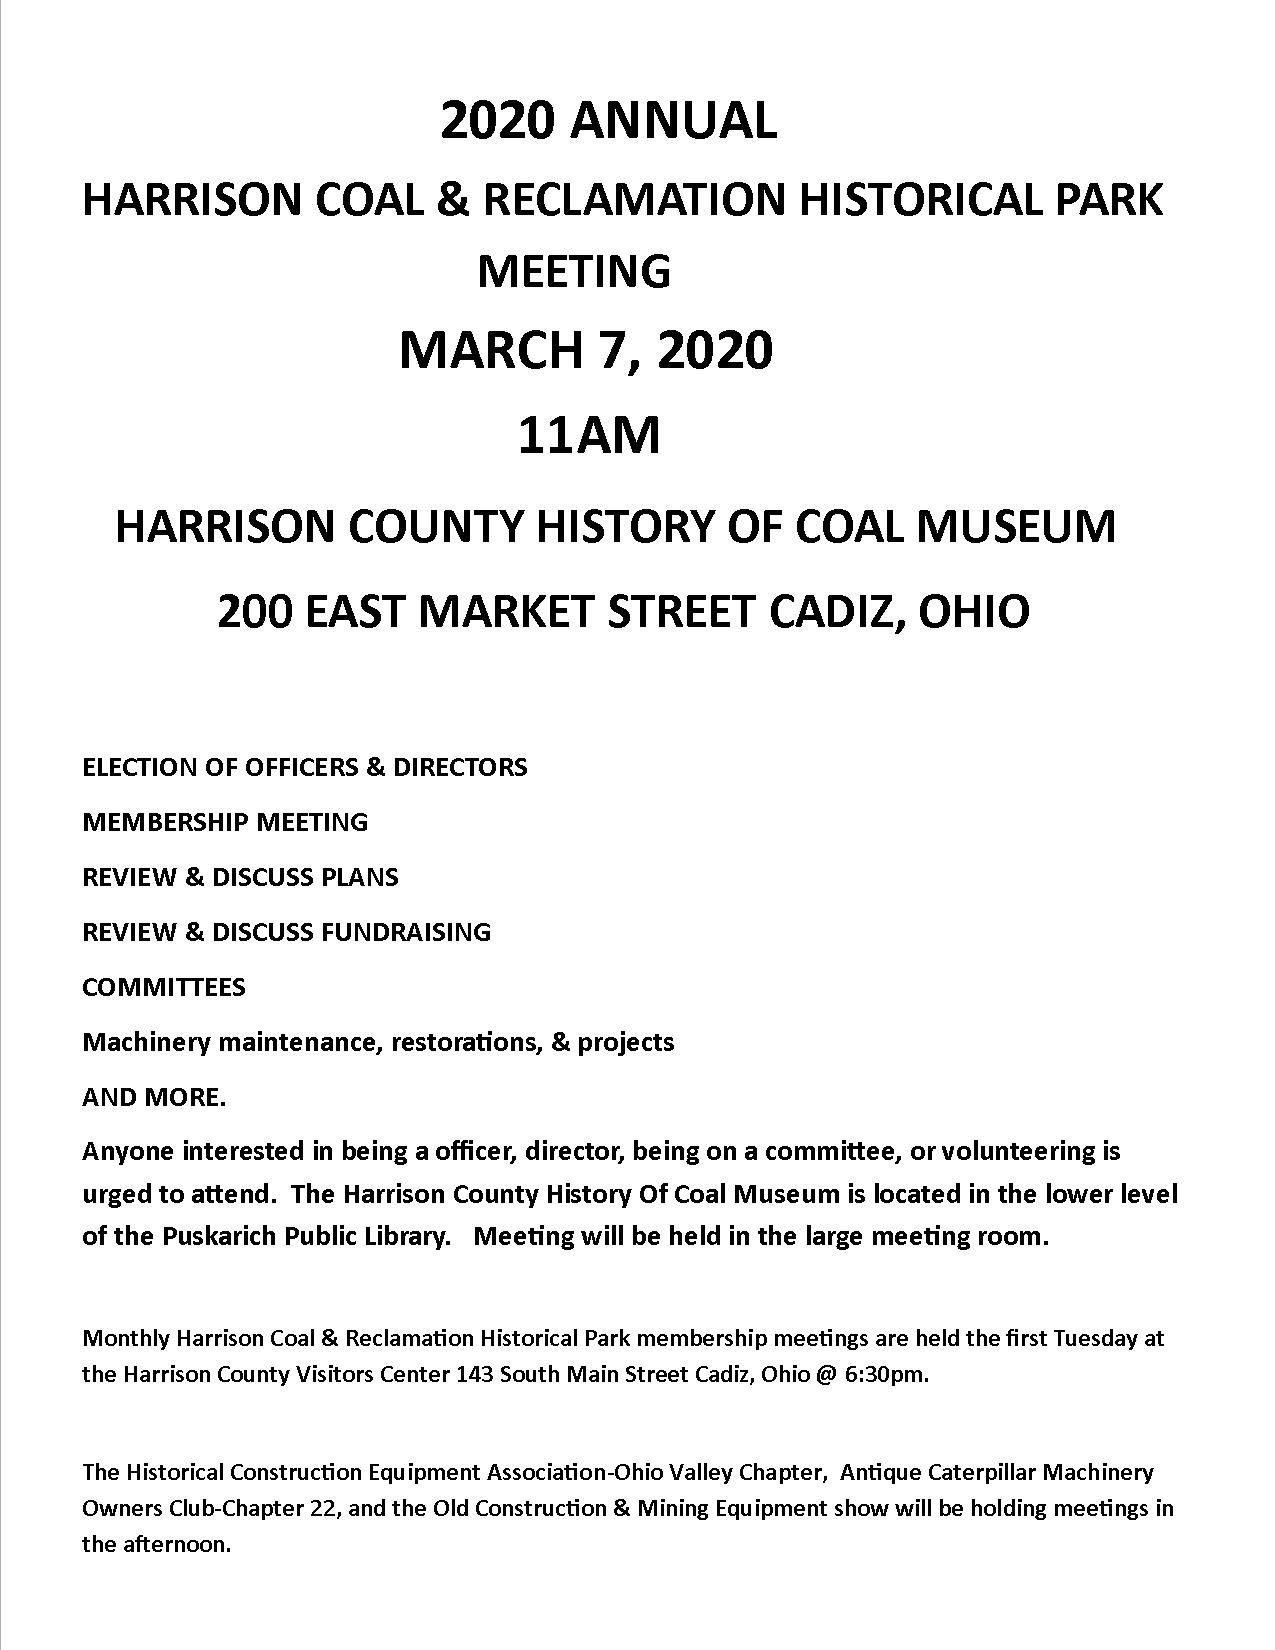 Harrison Coal and Reclamation Historial Park Meeting flier